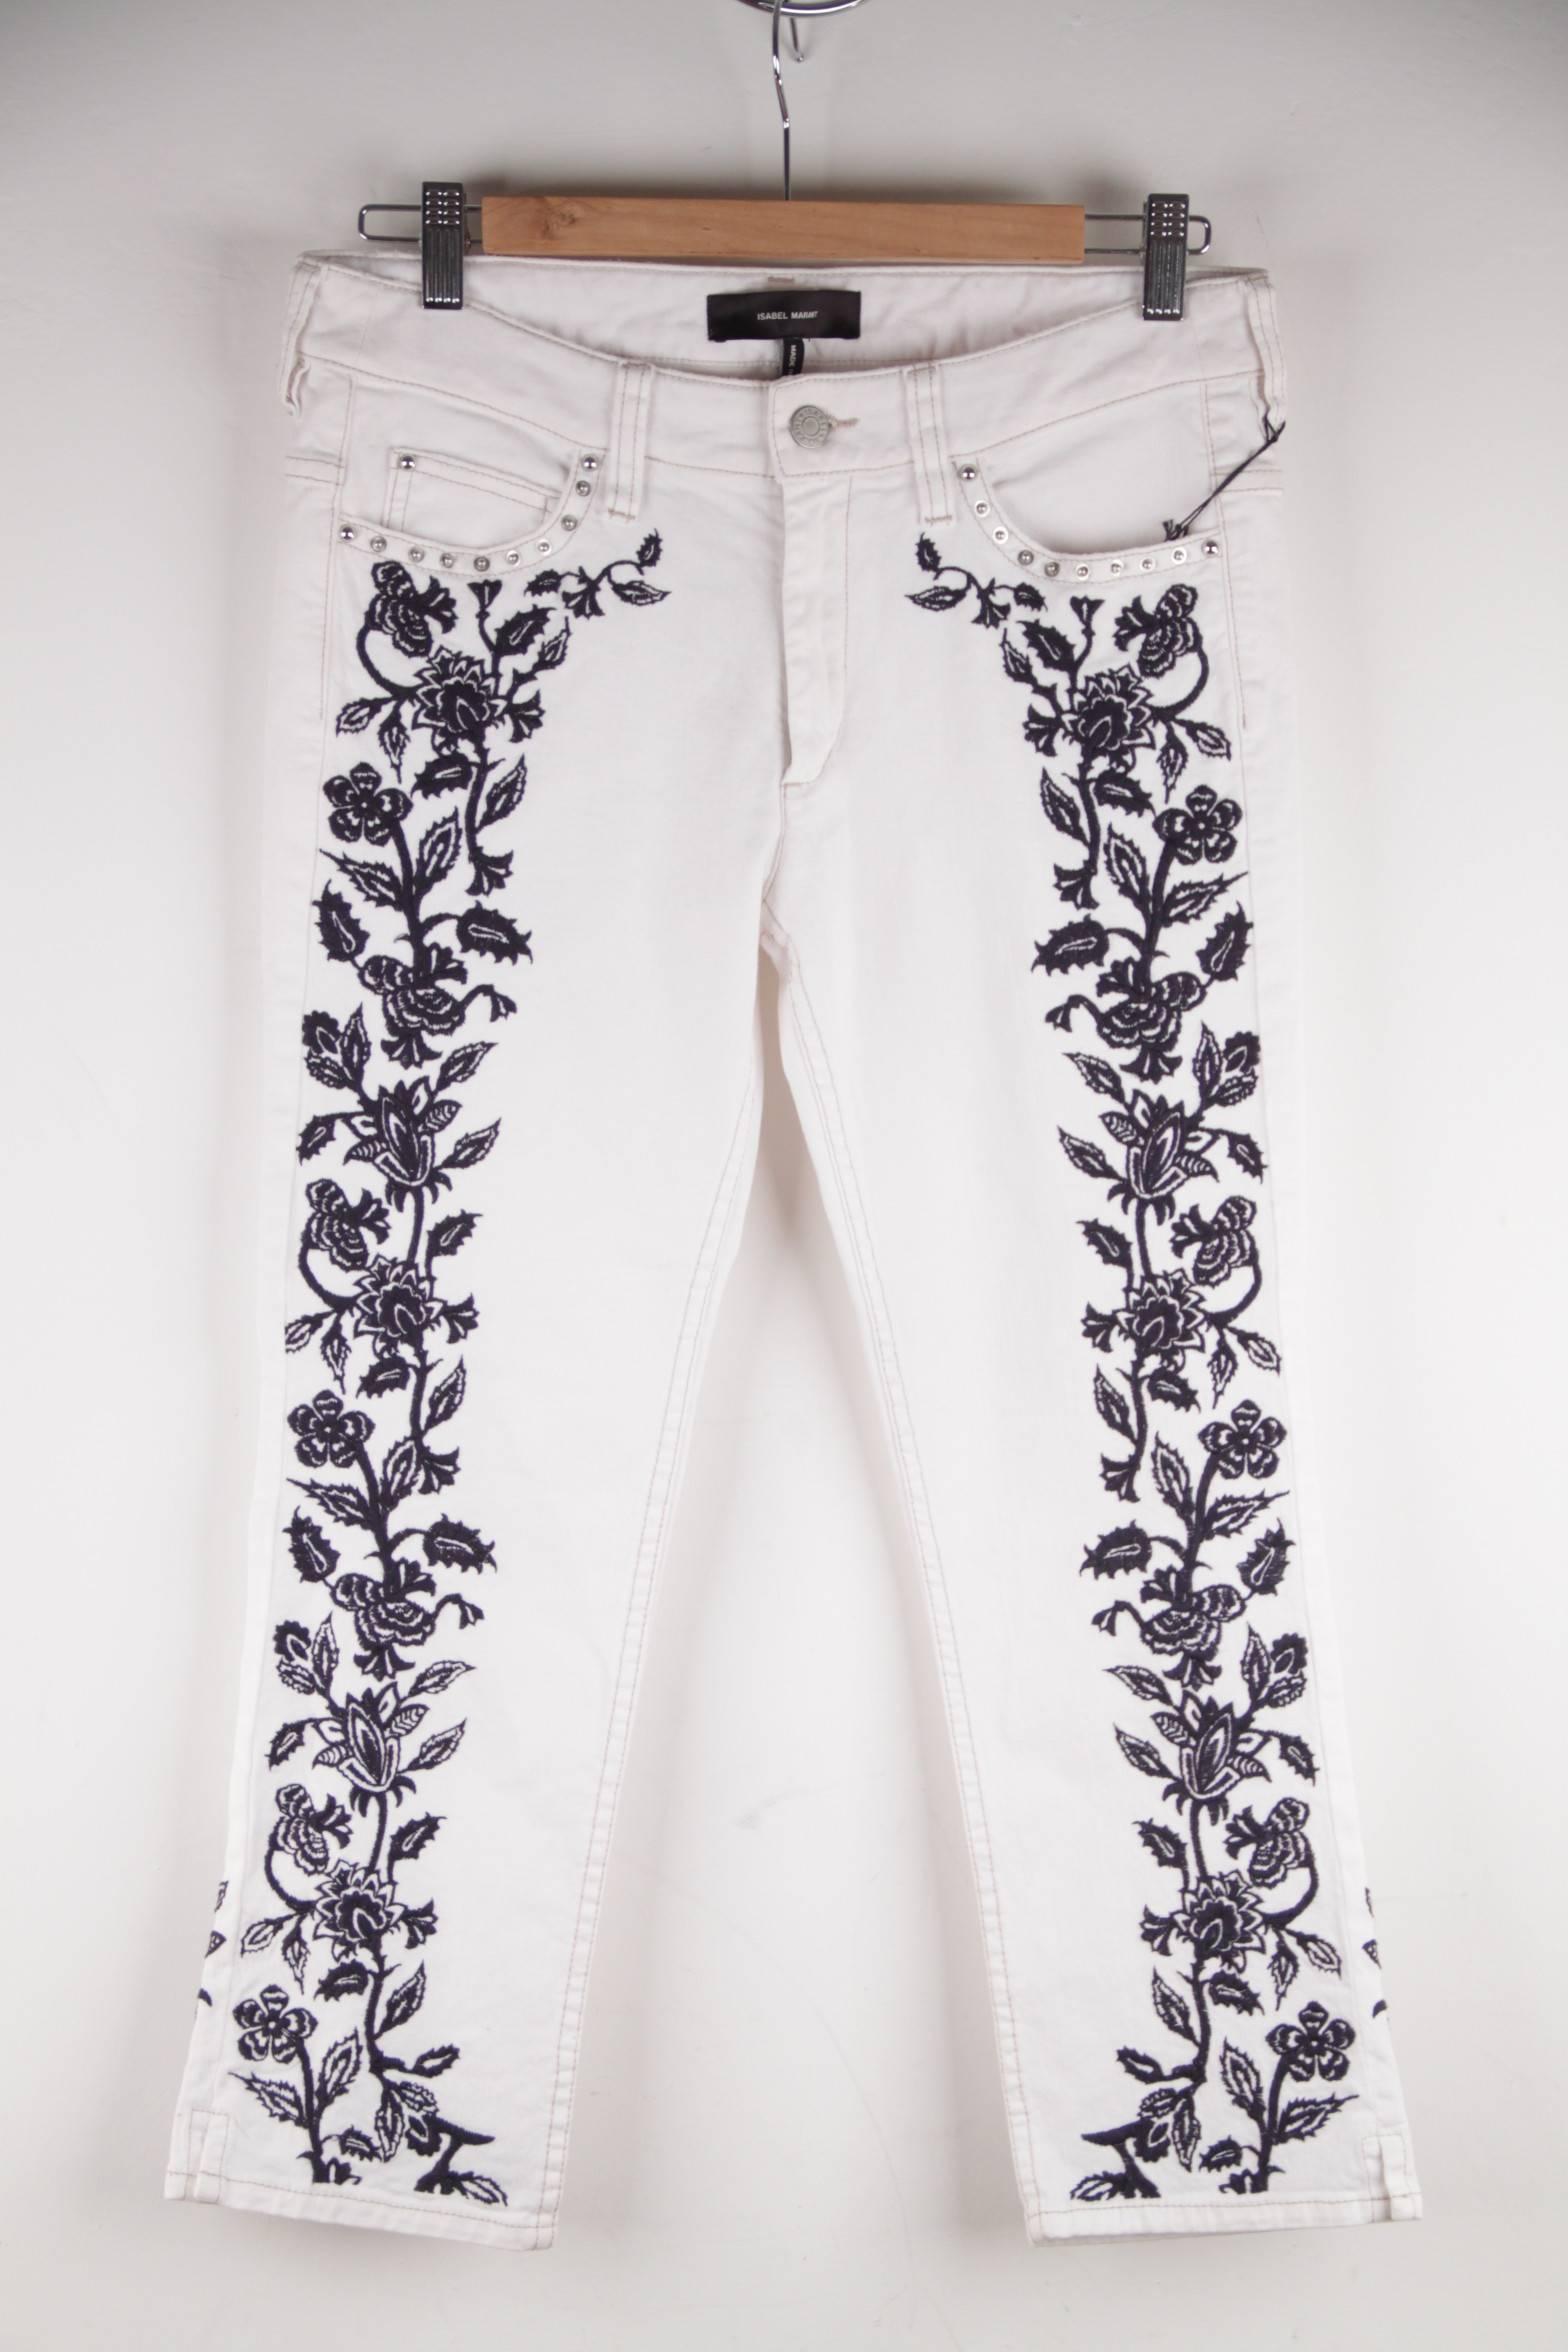  - White skinny fit denim
- Contrast embroidery
- Studs accents
- Ankle-grazing silhouette
- Belt loops
- Five pockets
- Button and zip fastening at front
- Slit at outer leg
- 97%% cotton, 3% elastane
- Size: 38 (The size shown for this